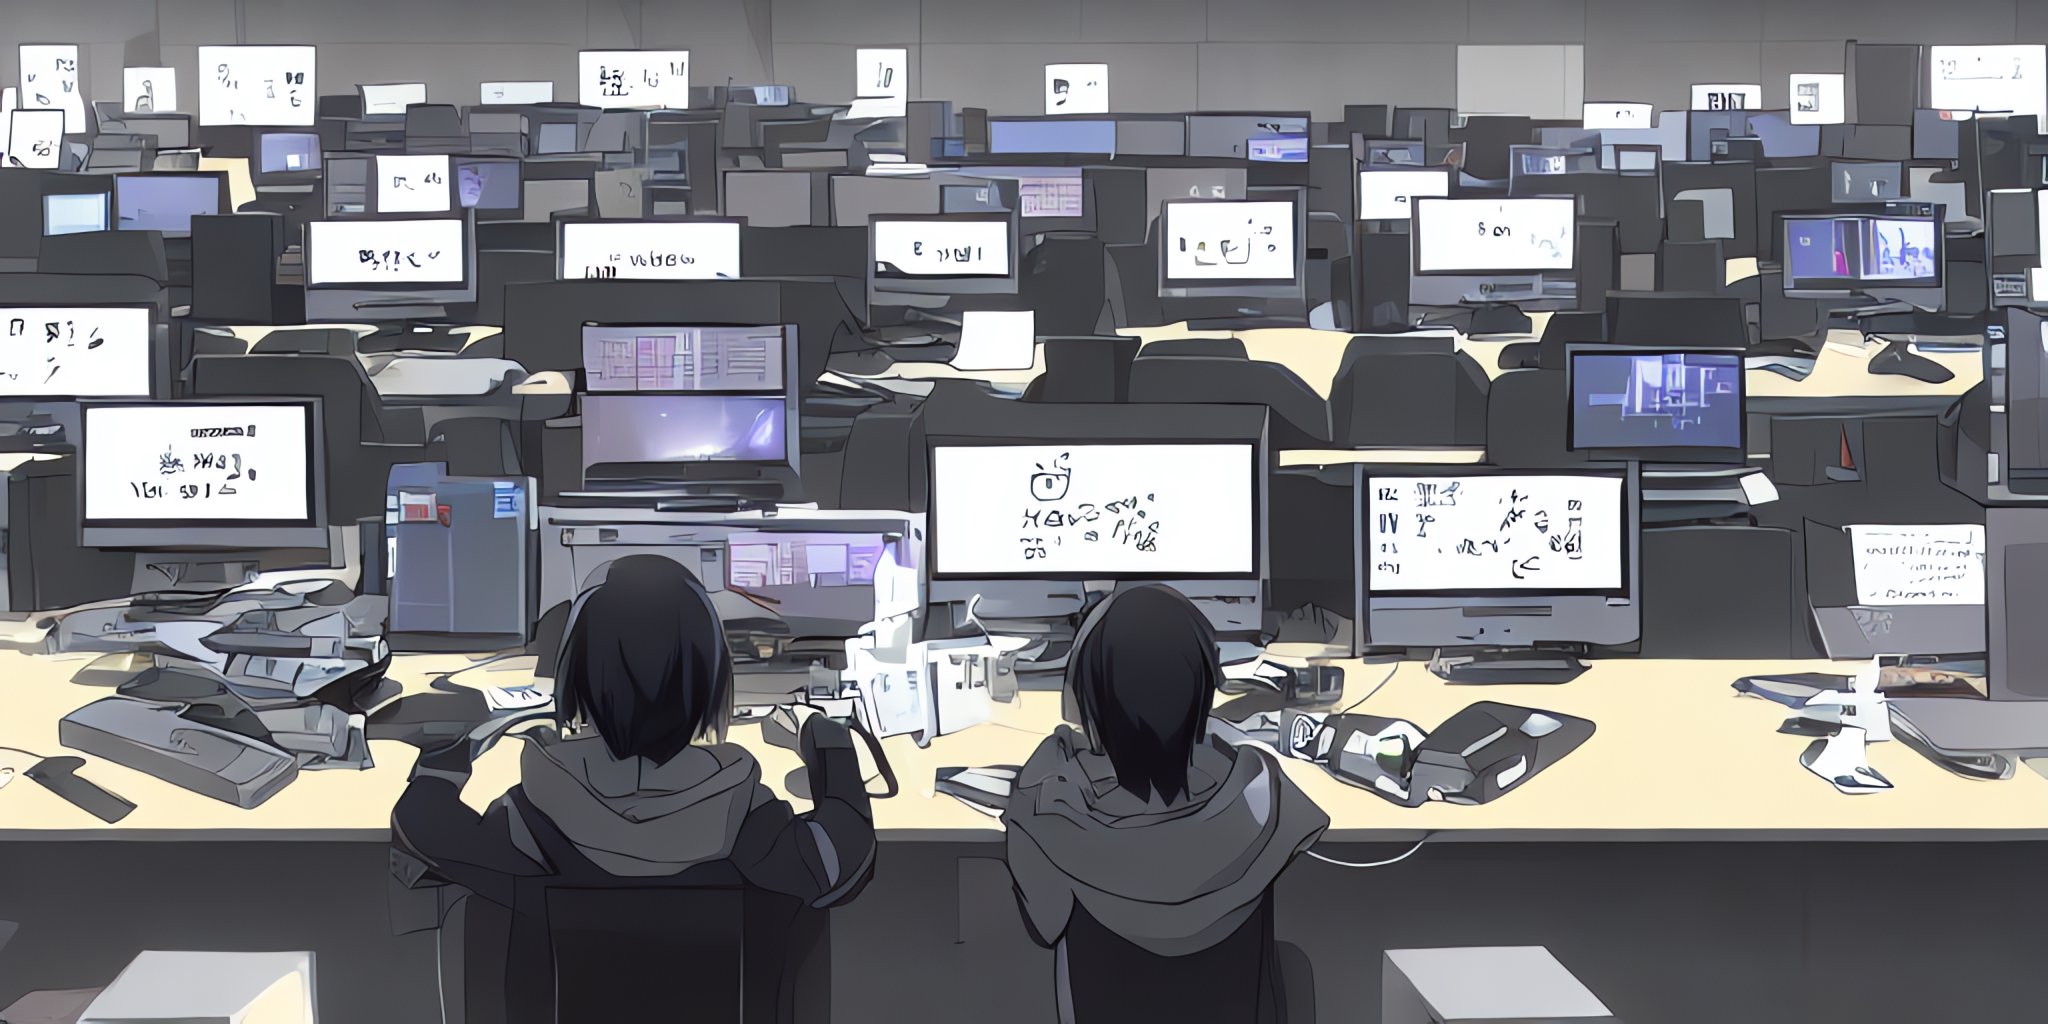 An image of an evil hacker at a laptop hacking into the pentagon, anime style, hacker den, monitors everywhere, serial experiments lain, evangelion